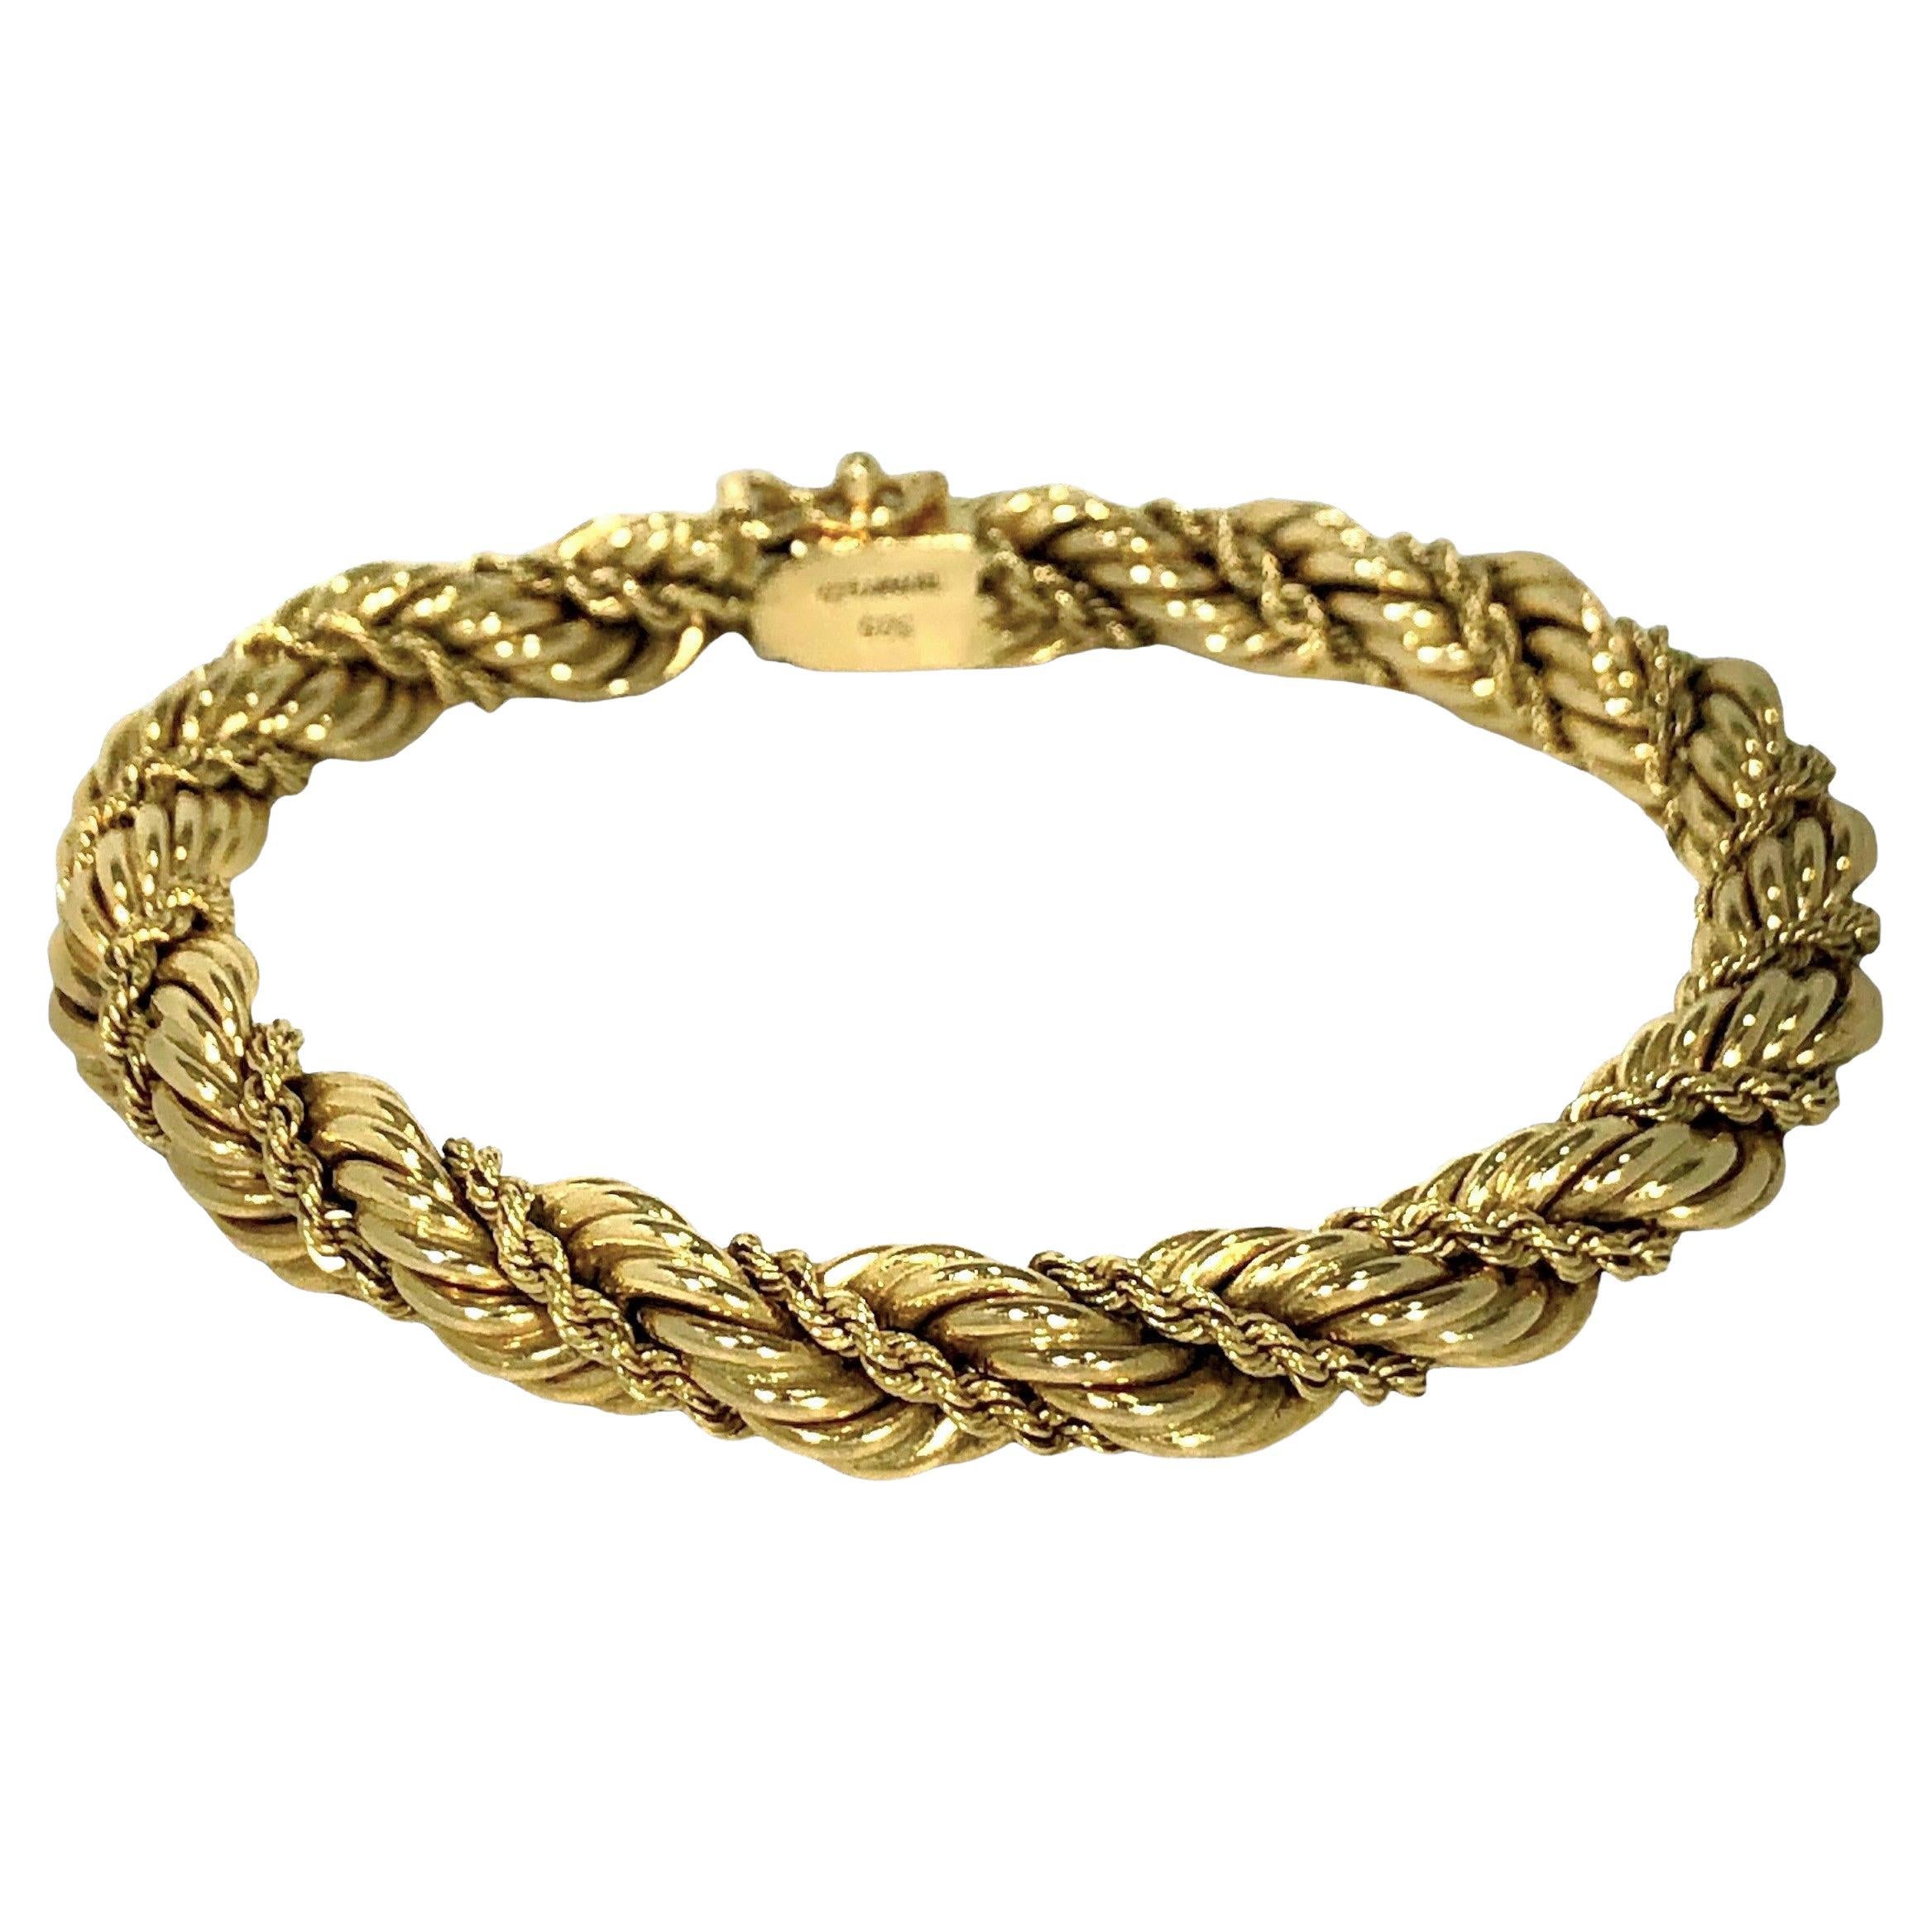 This wrapped and twisted rope bracelet by Tiffany & Co., is a beautiful example of the absolute best of the genre. Made of 14K gold and most probably manufactured in Germany during the Mid-20th Century, it is a true classic. The 1/4 inch wide heavy